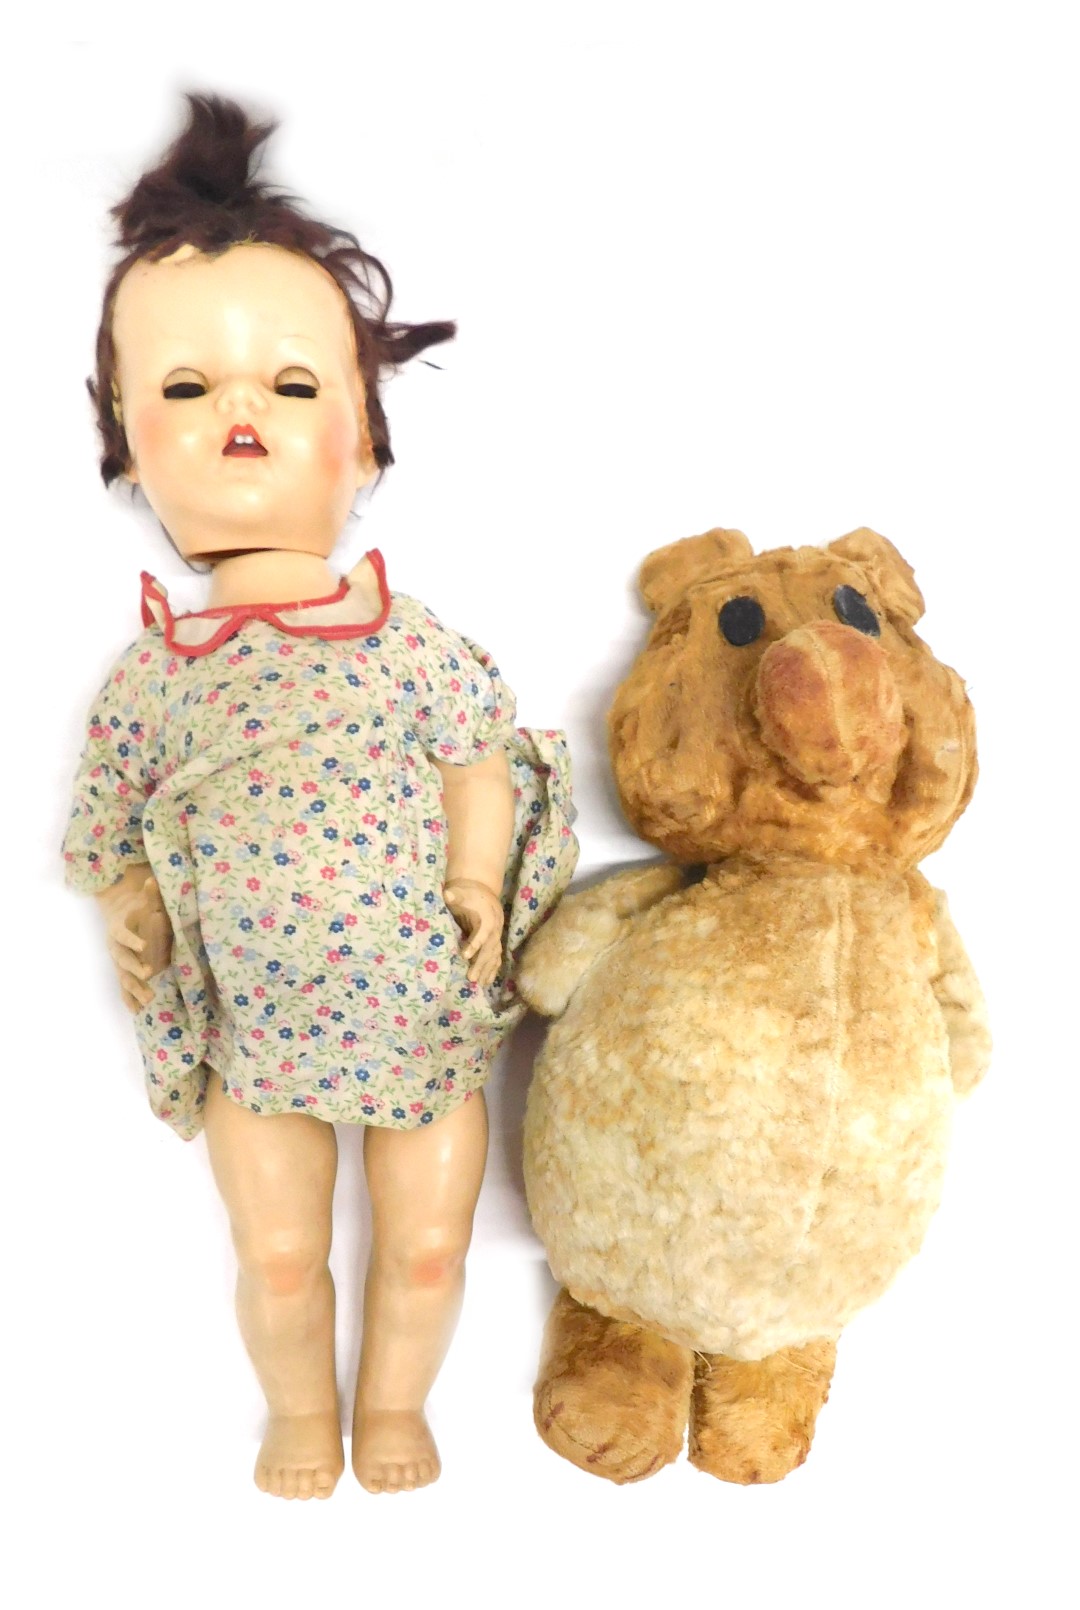 A Primo 1960s Teddy bear, 42cm high, and a Pedigree doll, in floral dress, 52cm high. (2)